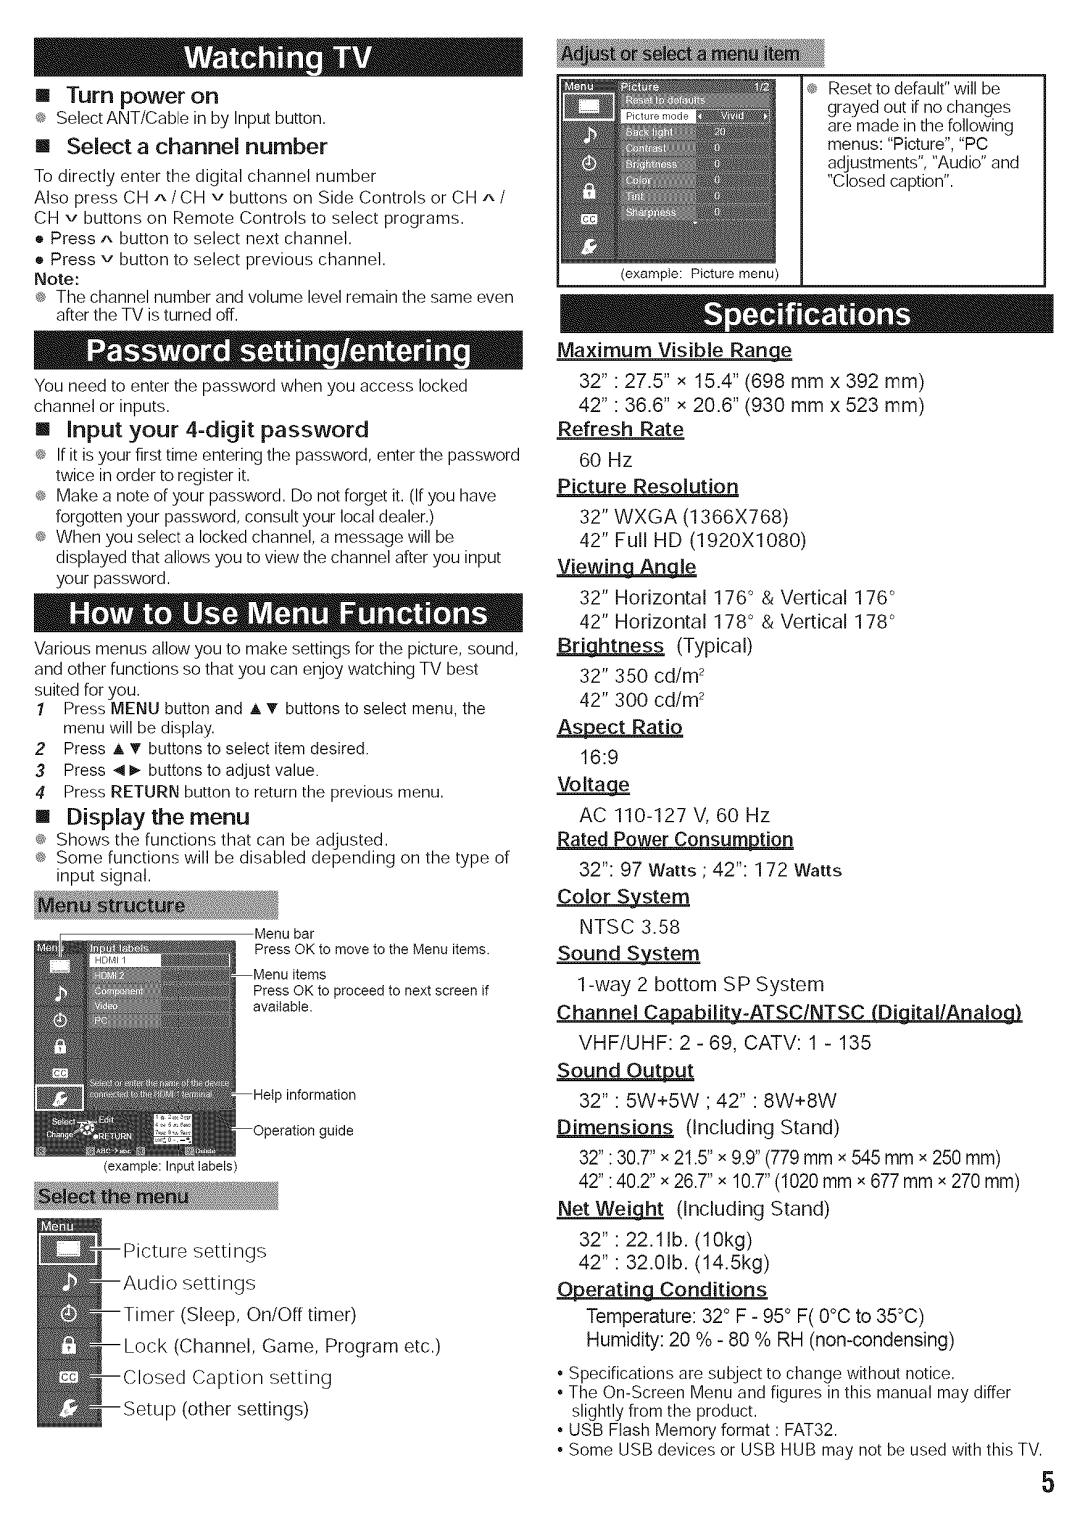 Panasonic TC-L42USX manual Turn power on, Select a channel number, Input your 4-digit password 